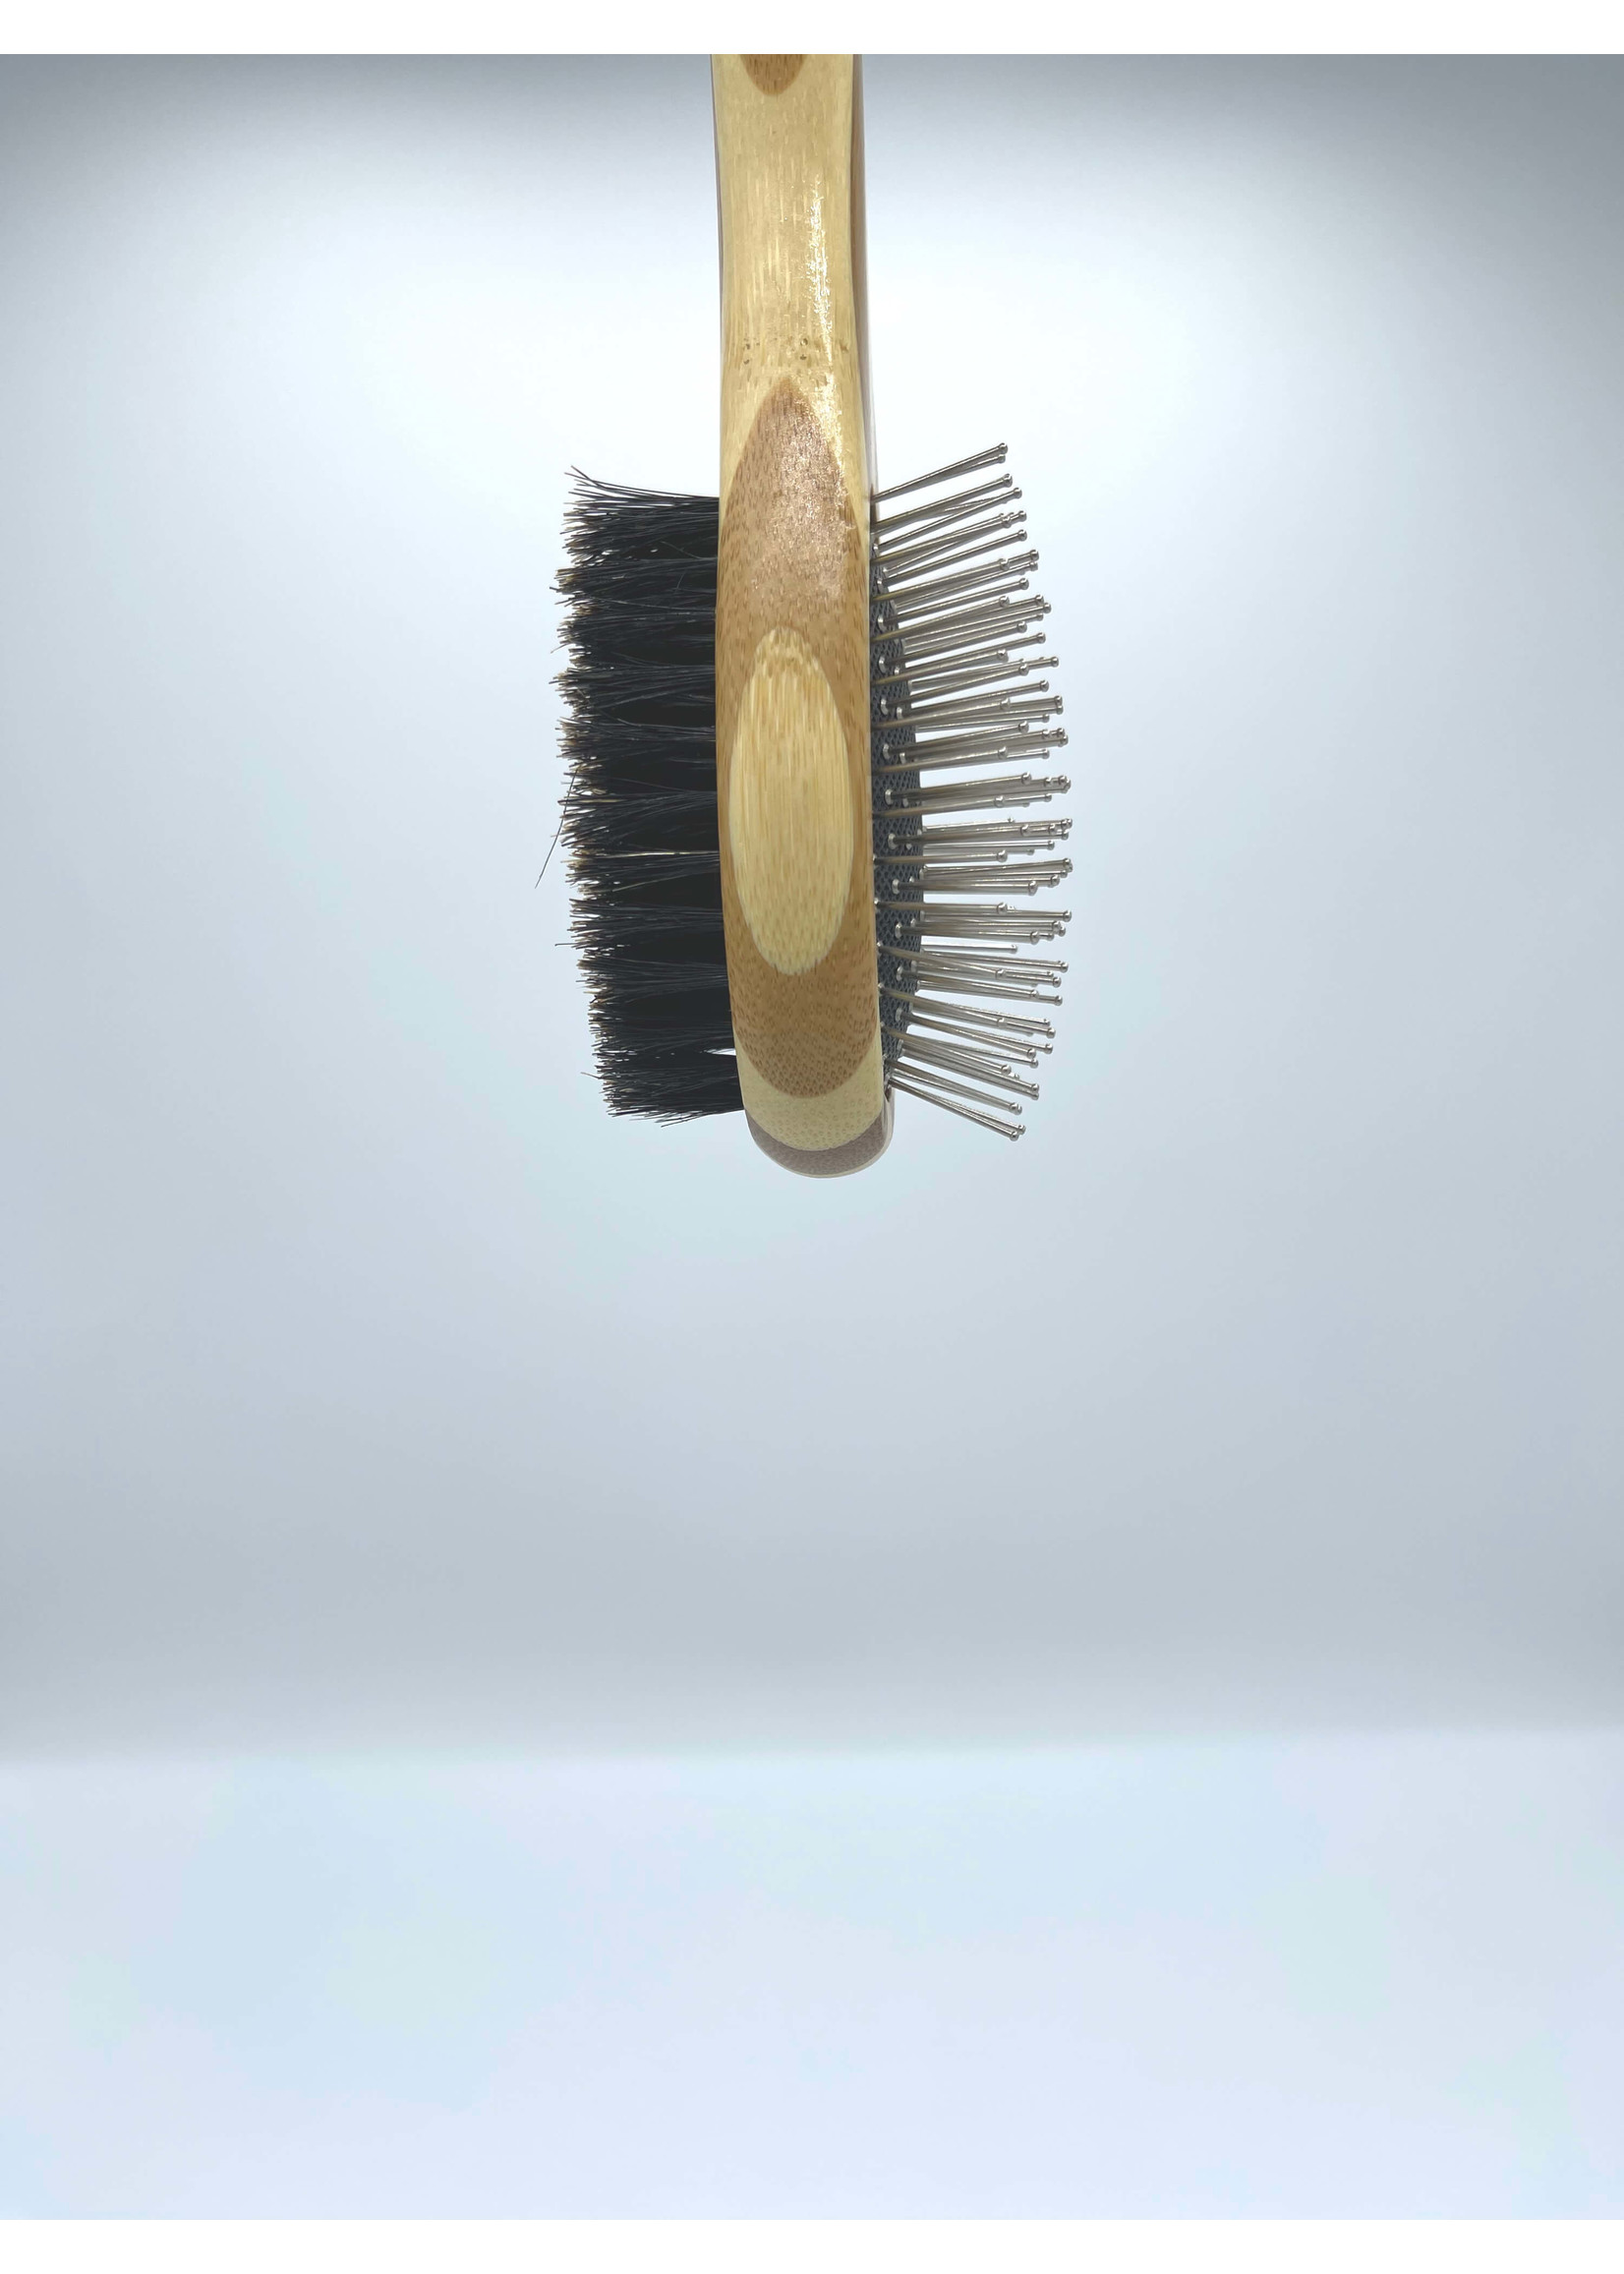 Double Sided Cat/Dog Brush - Skilos, A Family Pet Store